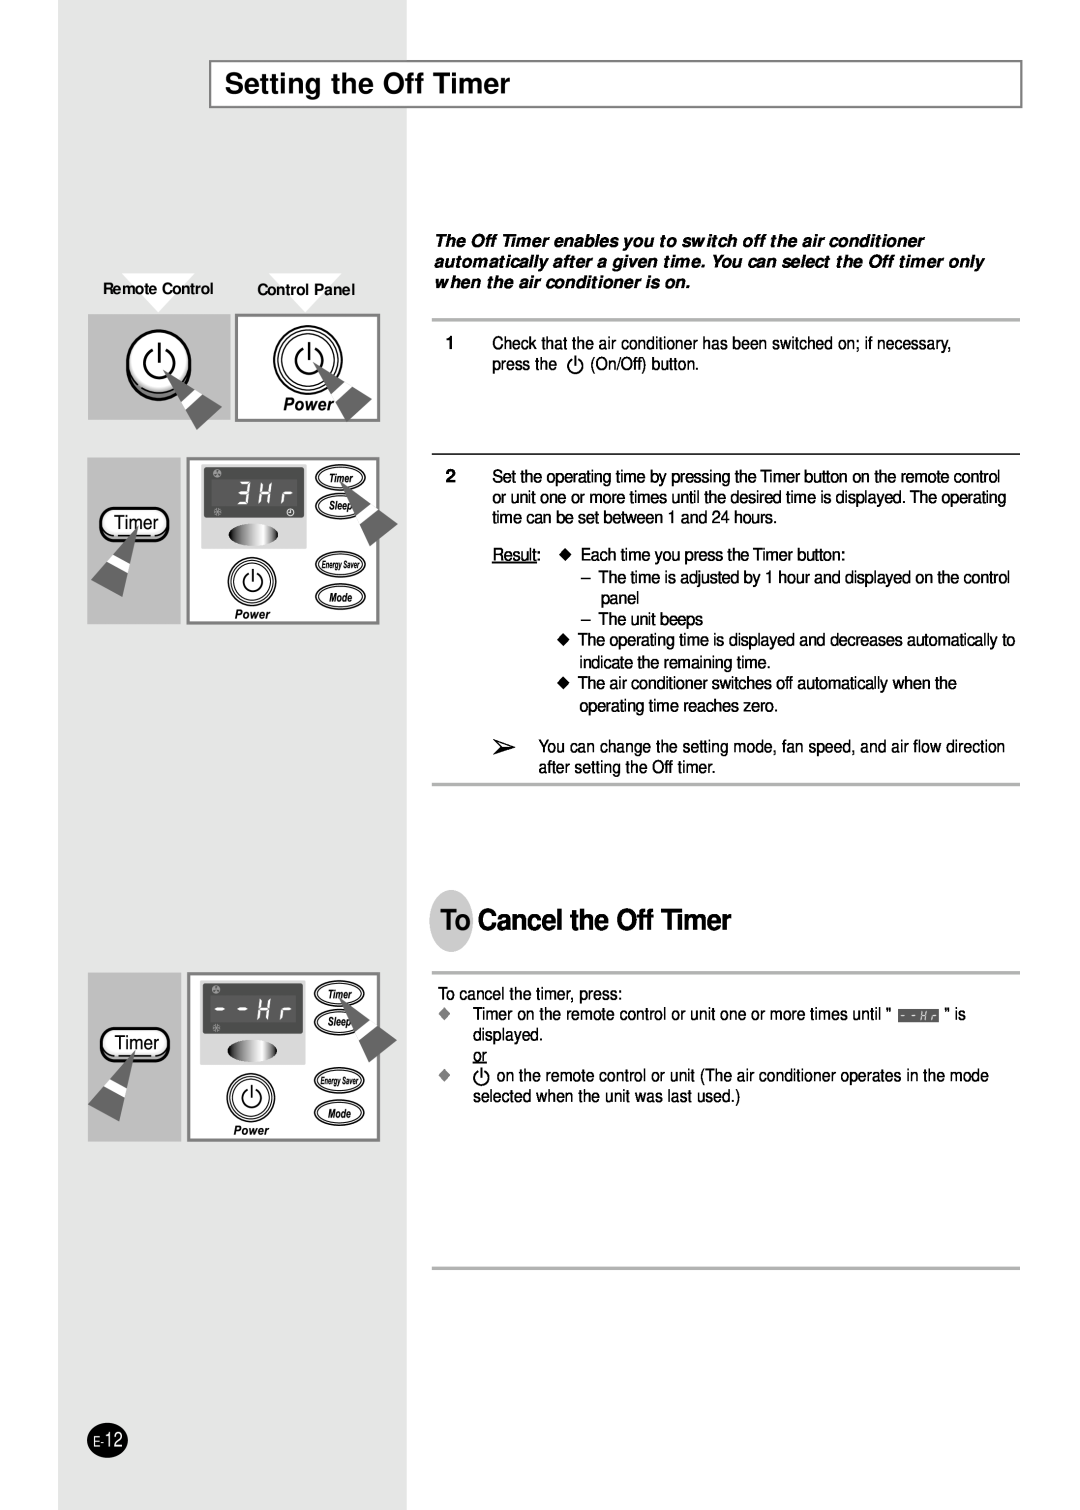 Samsung Model AW089AB manual Setting the Off Timer, To Cancel the Off Timer, Remote Control, Control Panel 